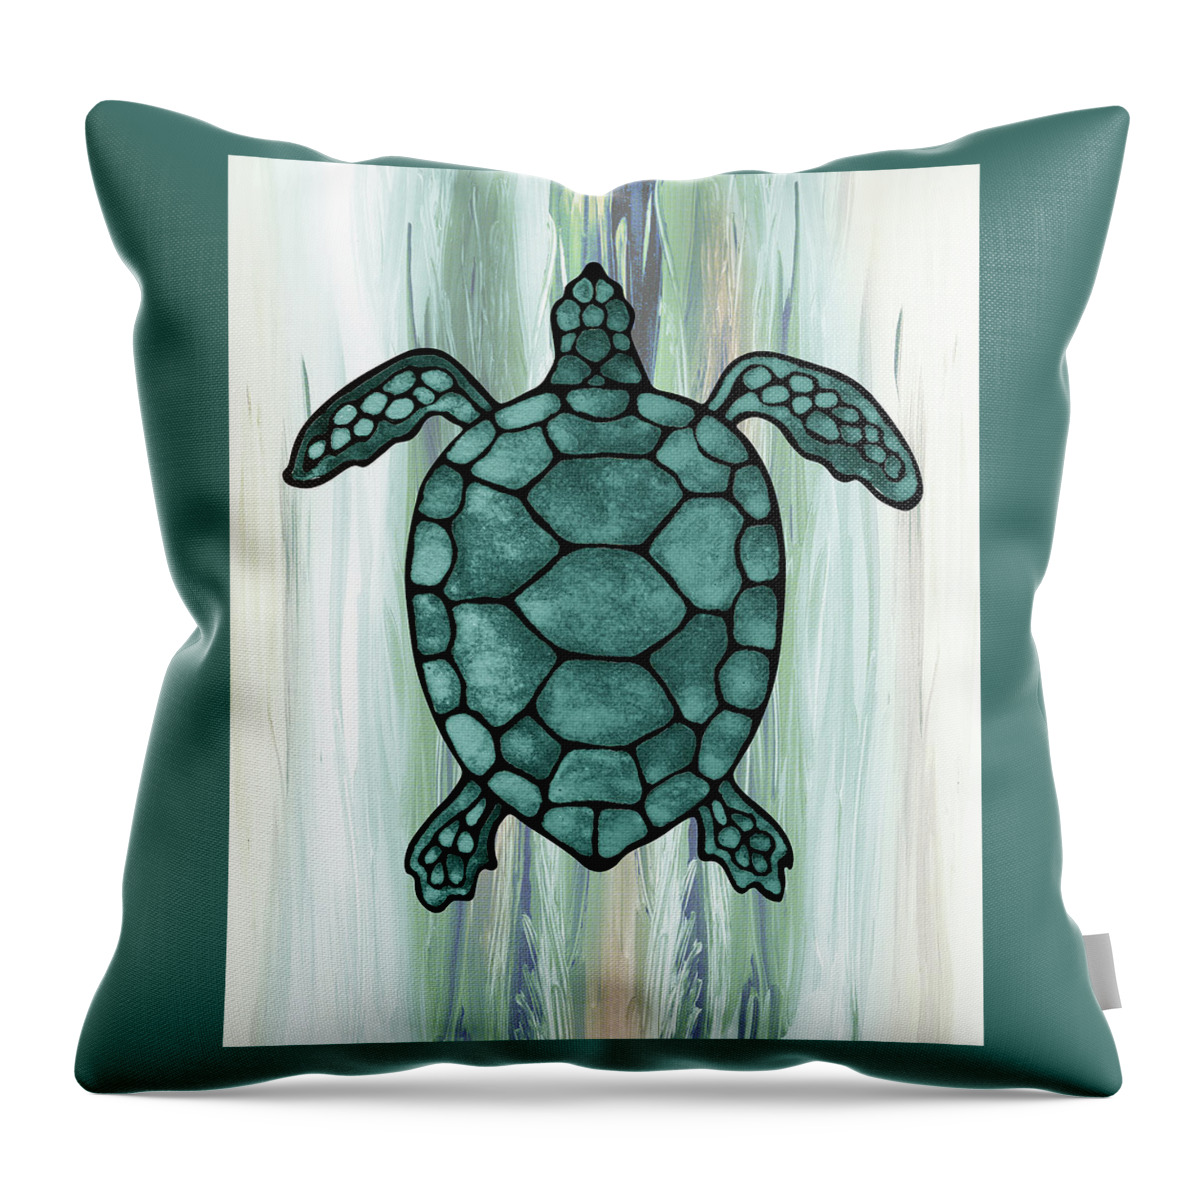 Green Throw Pillow featuring the painting Beautiful Giant Turtle In Teal Blue Sea by Irina Sztukowski